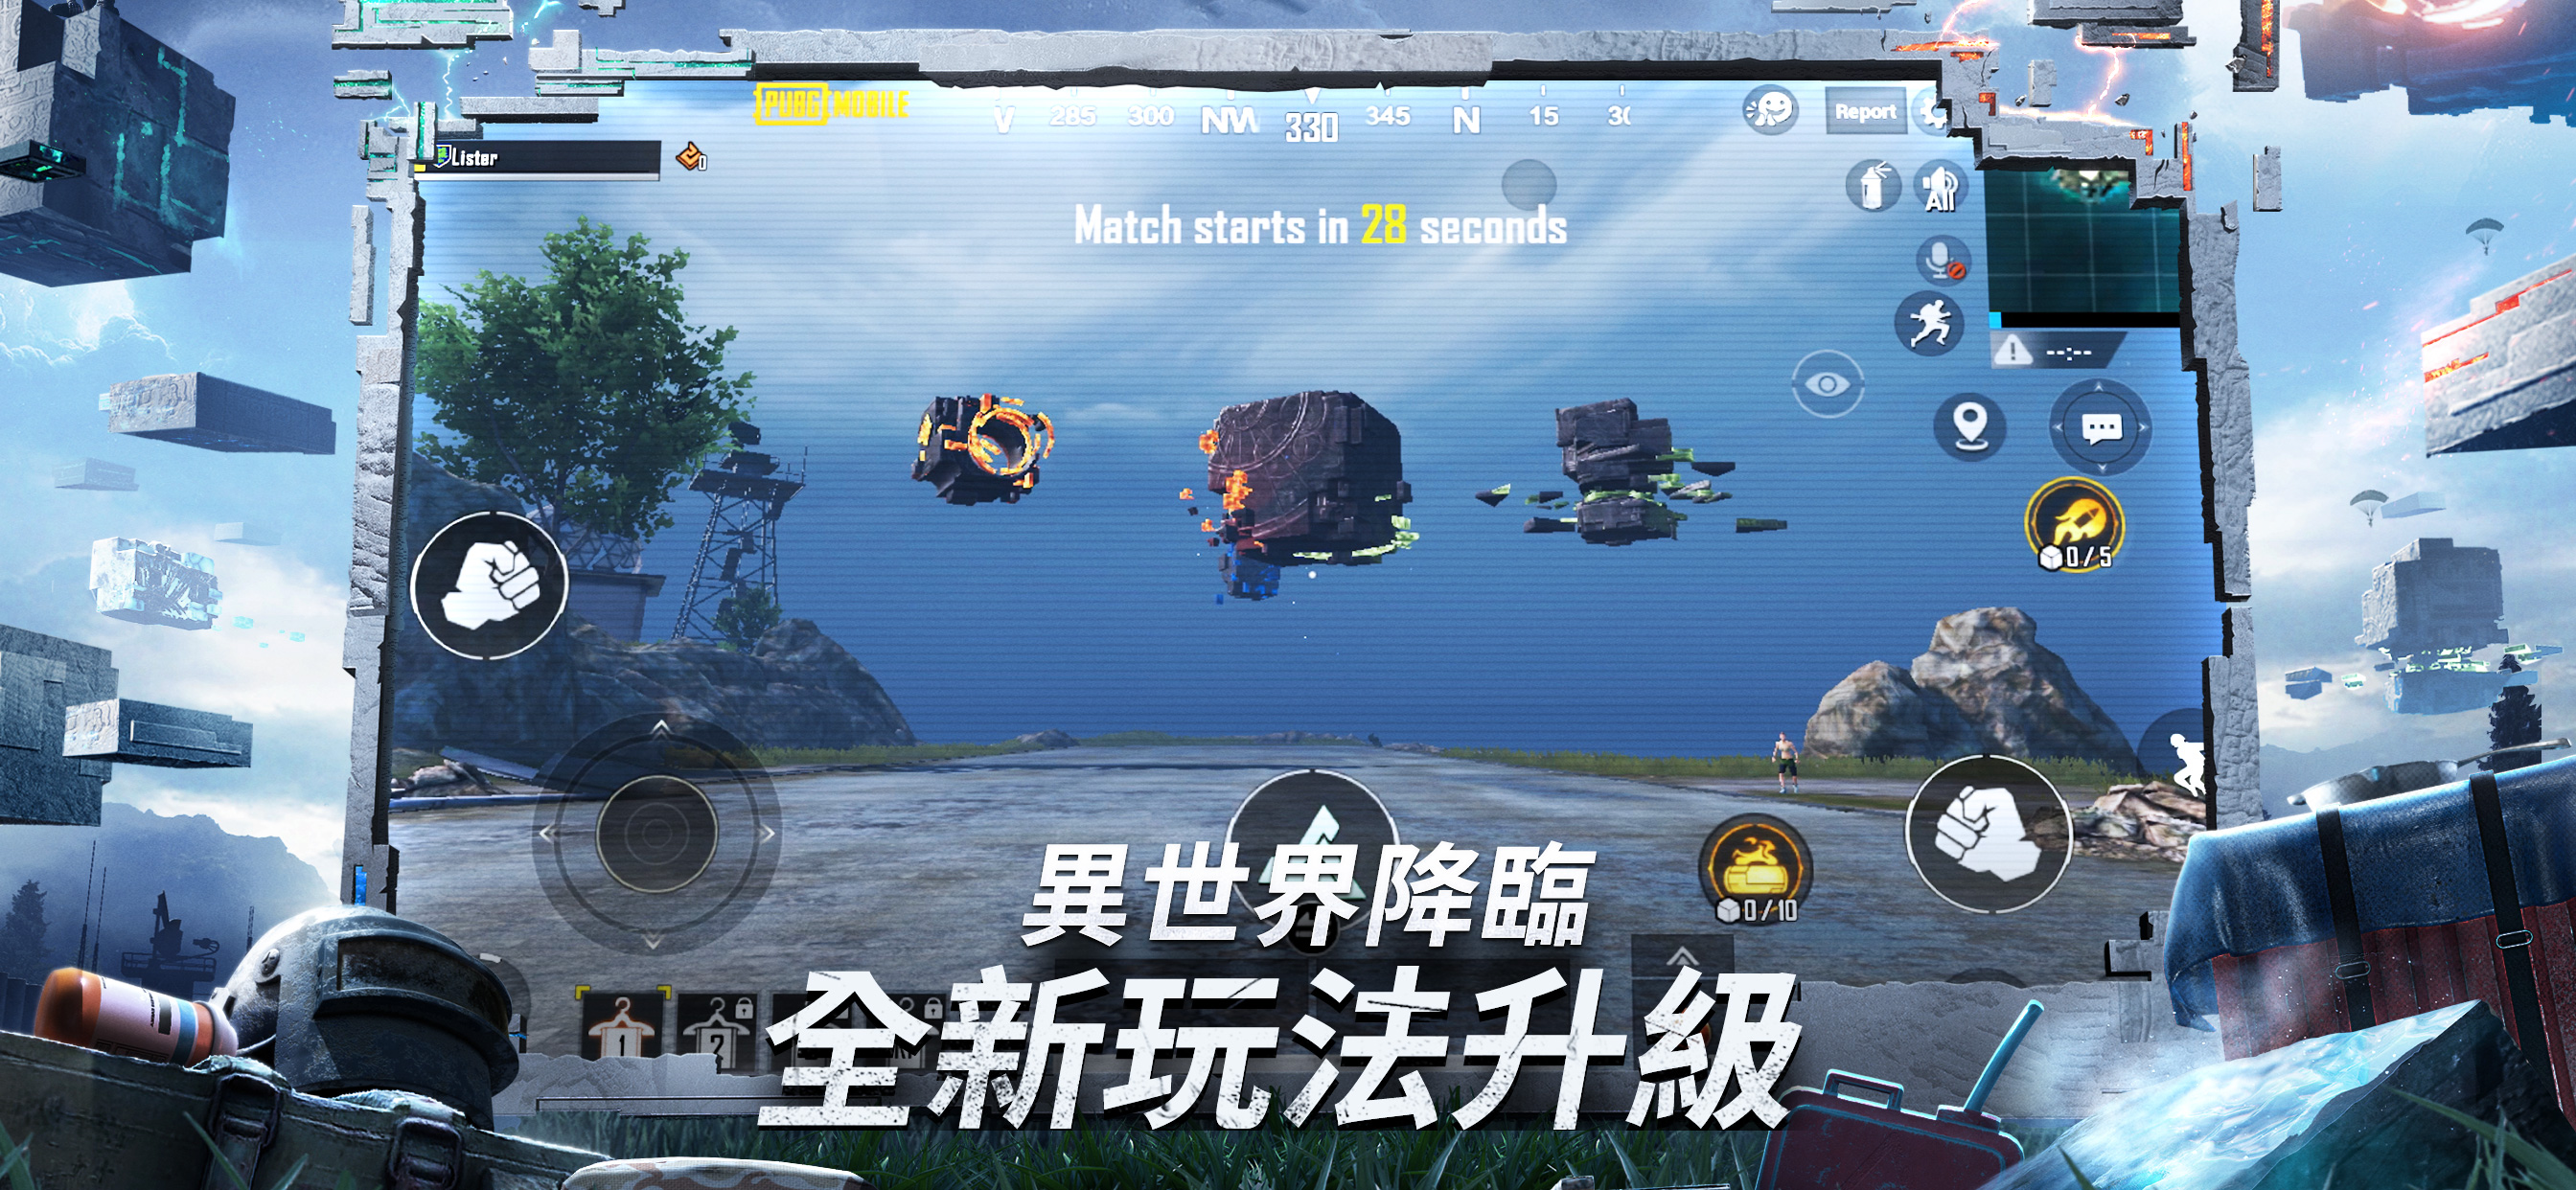 Pubg Mobile Runic Power Ad Intelligence Download Revenue App Ranking On Apple App Store In Hong Kong Apptica